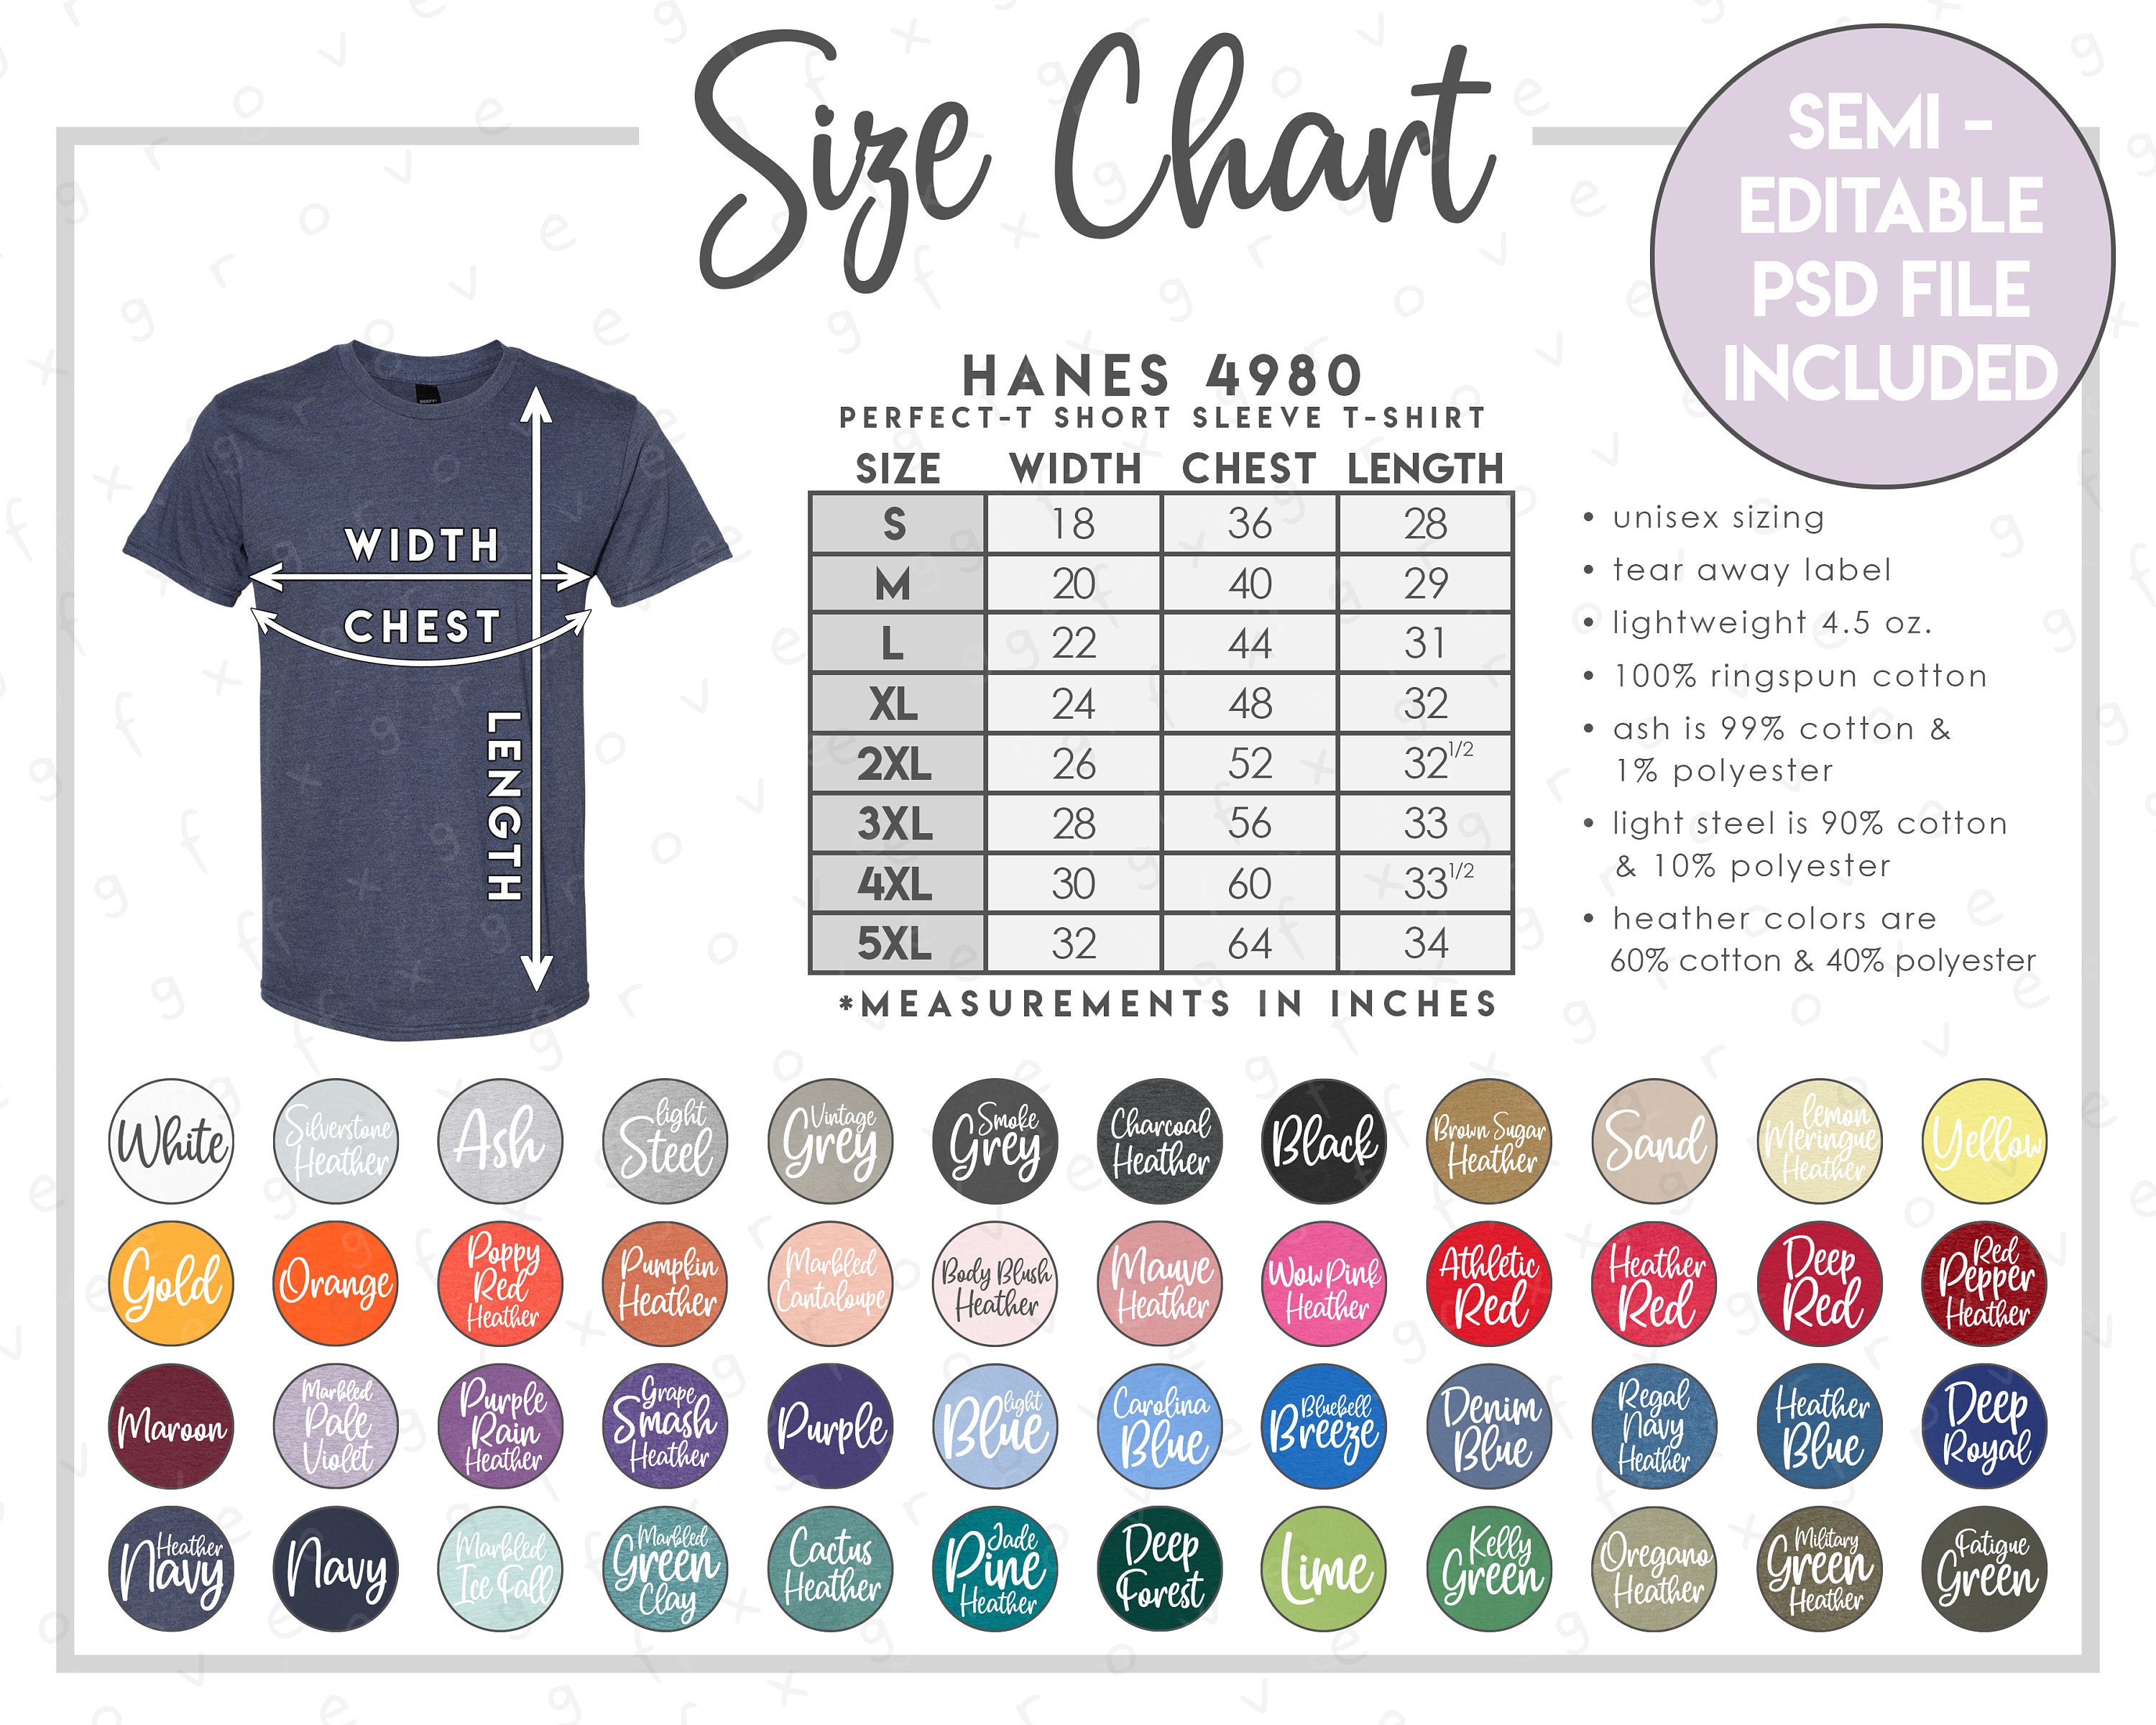 Semi-editable Hanes 4980 Size Chart Color Chart Perfect-t Short Sleeve  T-shirt Size Chart 4980 T-shirt Color Chart H4980 -  Norway